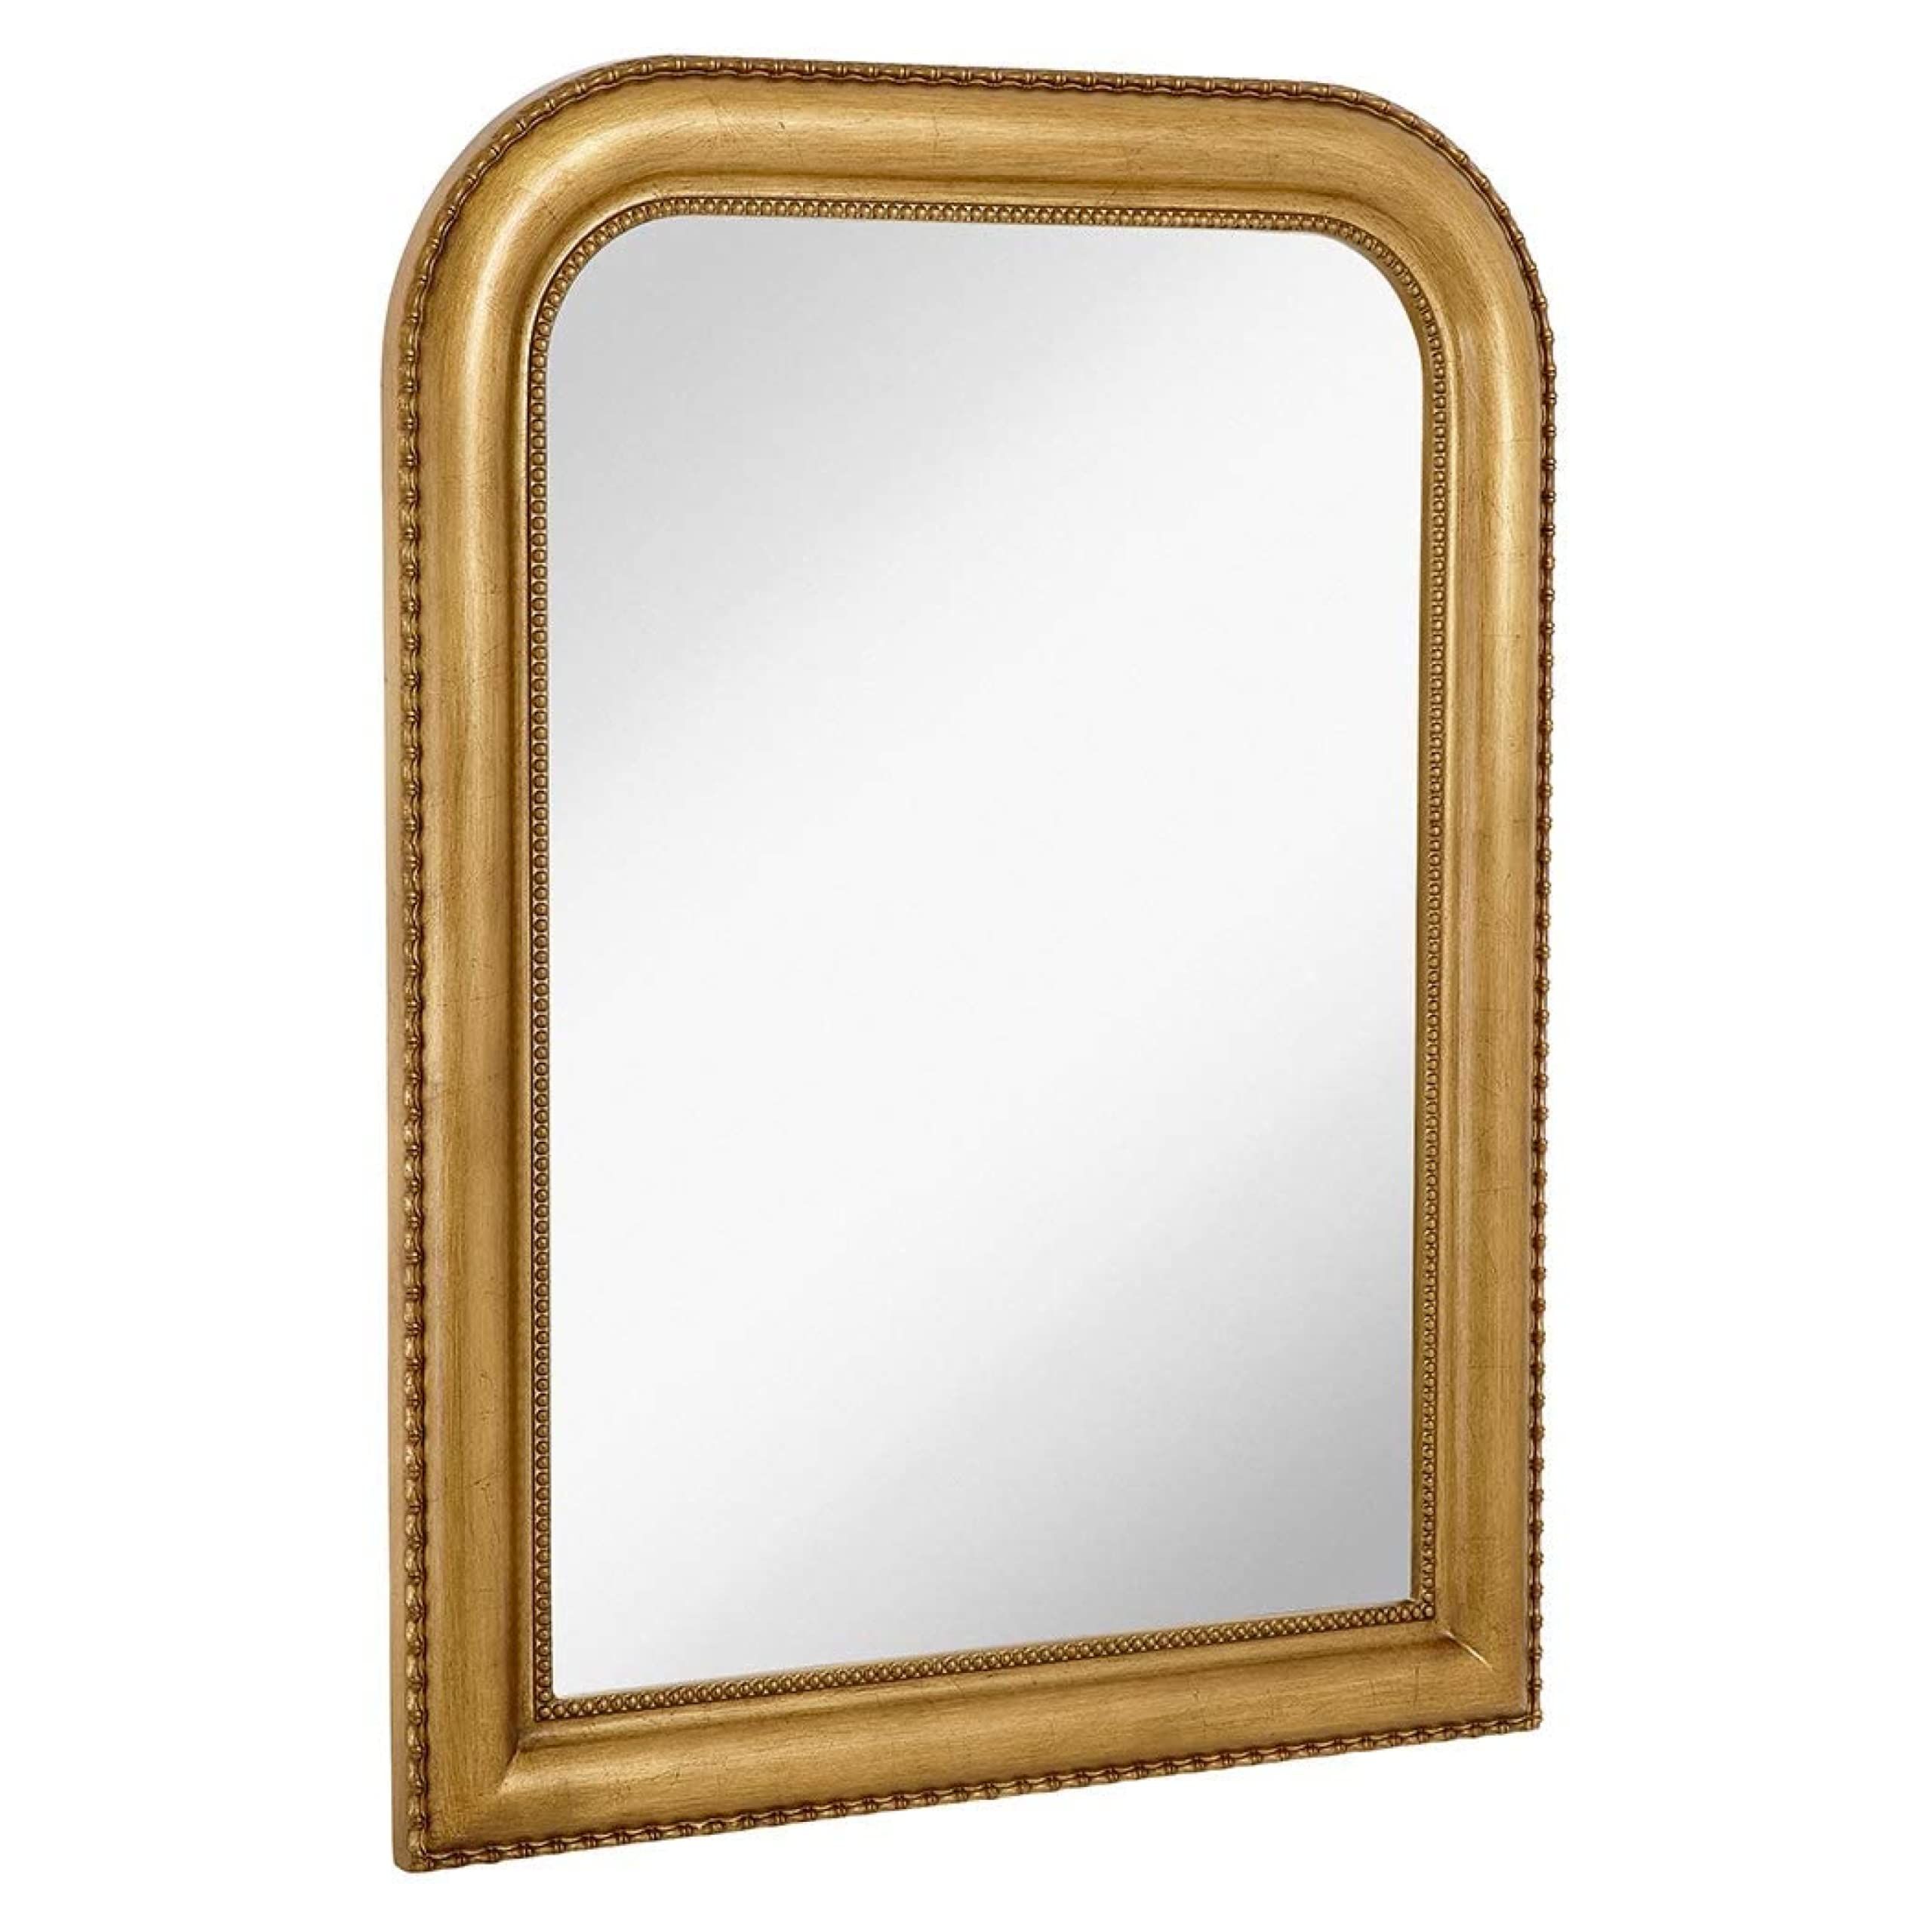 Hamilton Hills 30"x40" Gold Arched Top Wall Mirror - Polished Glass and Thick Frame for Bathroom ... | Amazon (US)